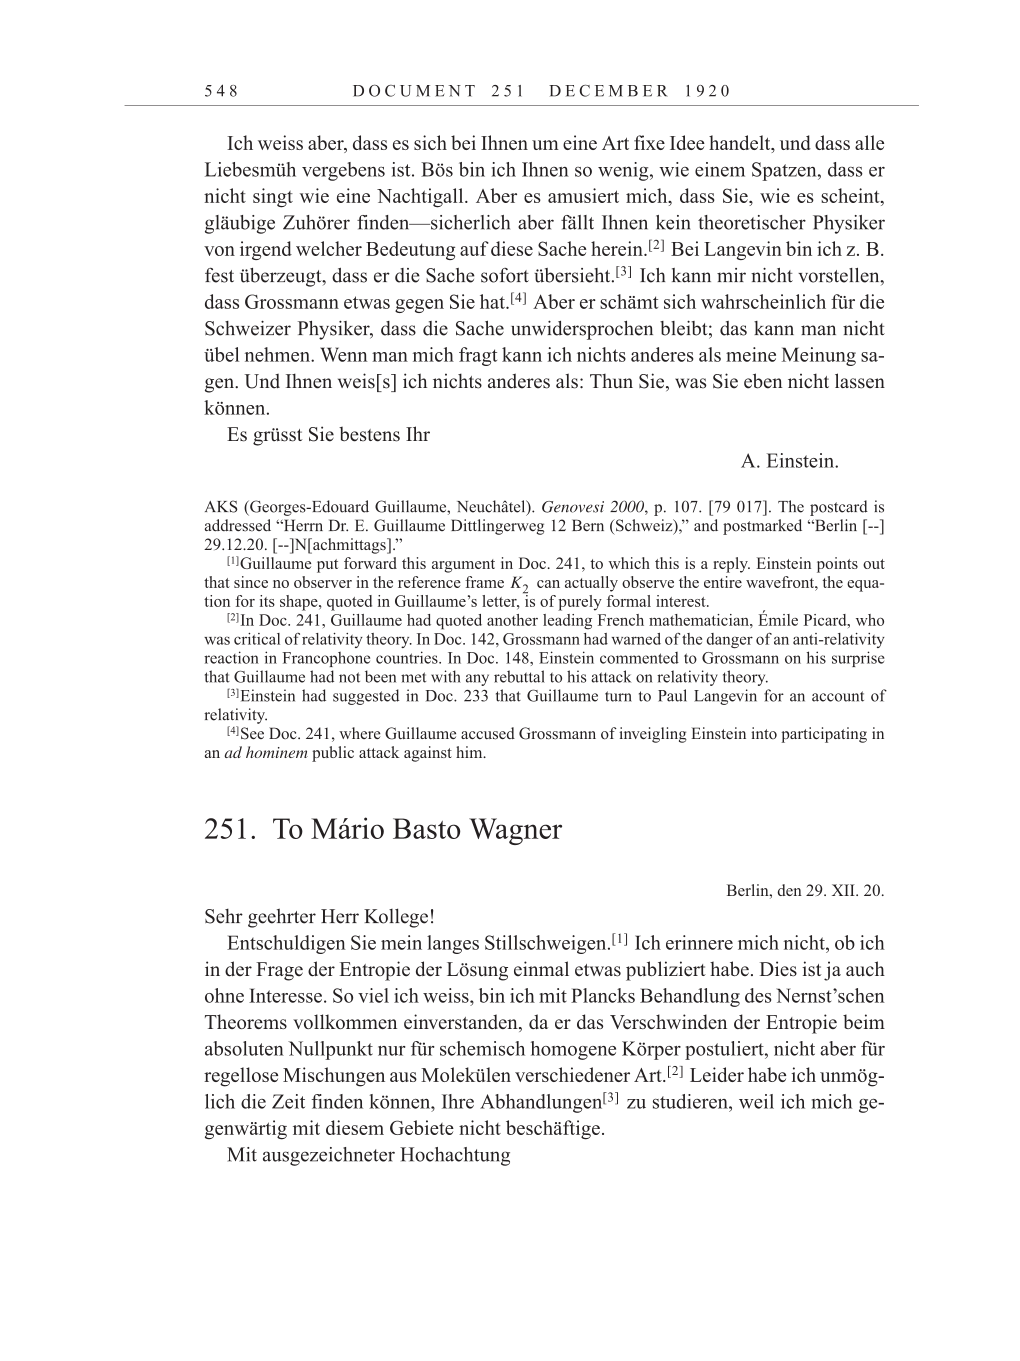 Volume 10: The Berlin Years: Correspondence May-December 1920 / Supplementary Correspondence 1909-1920 page 548